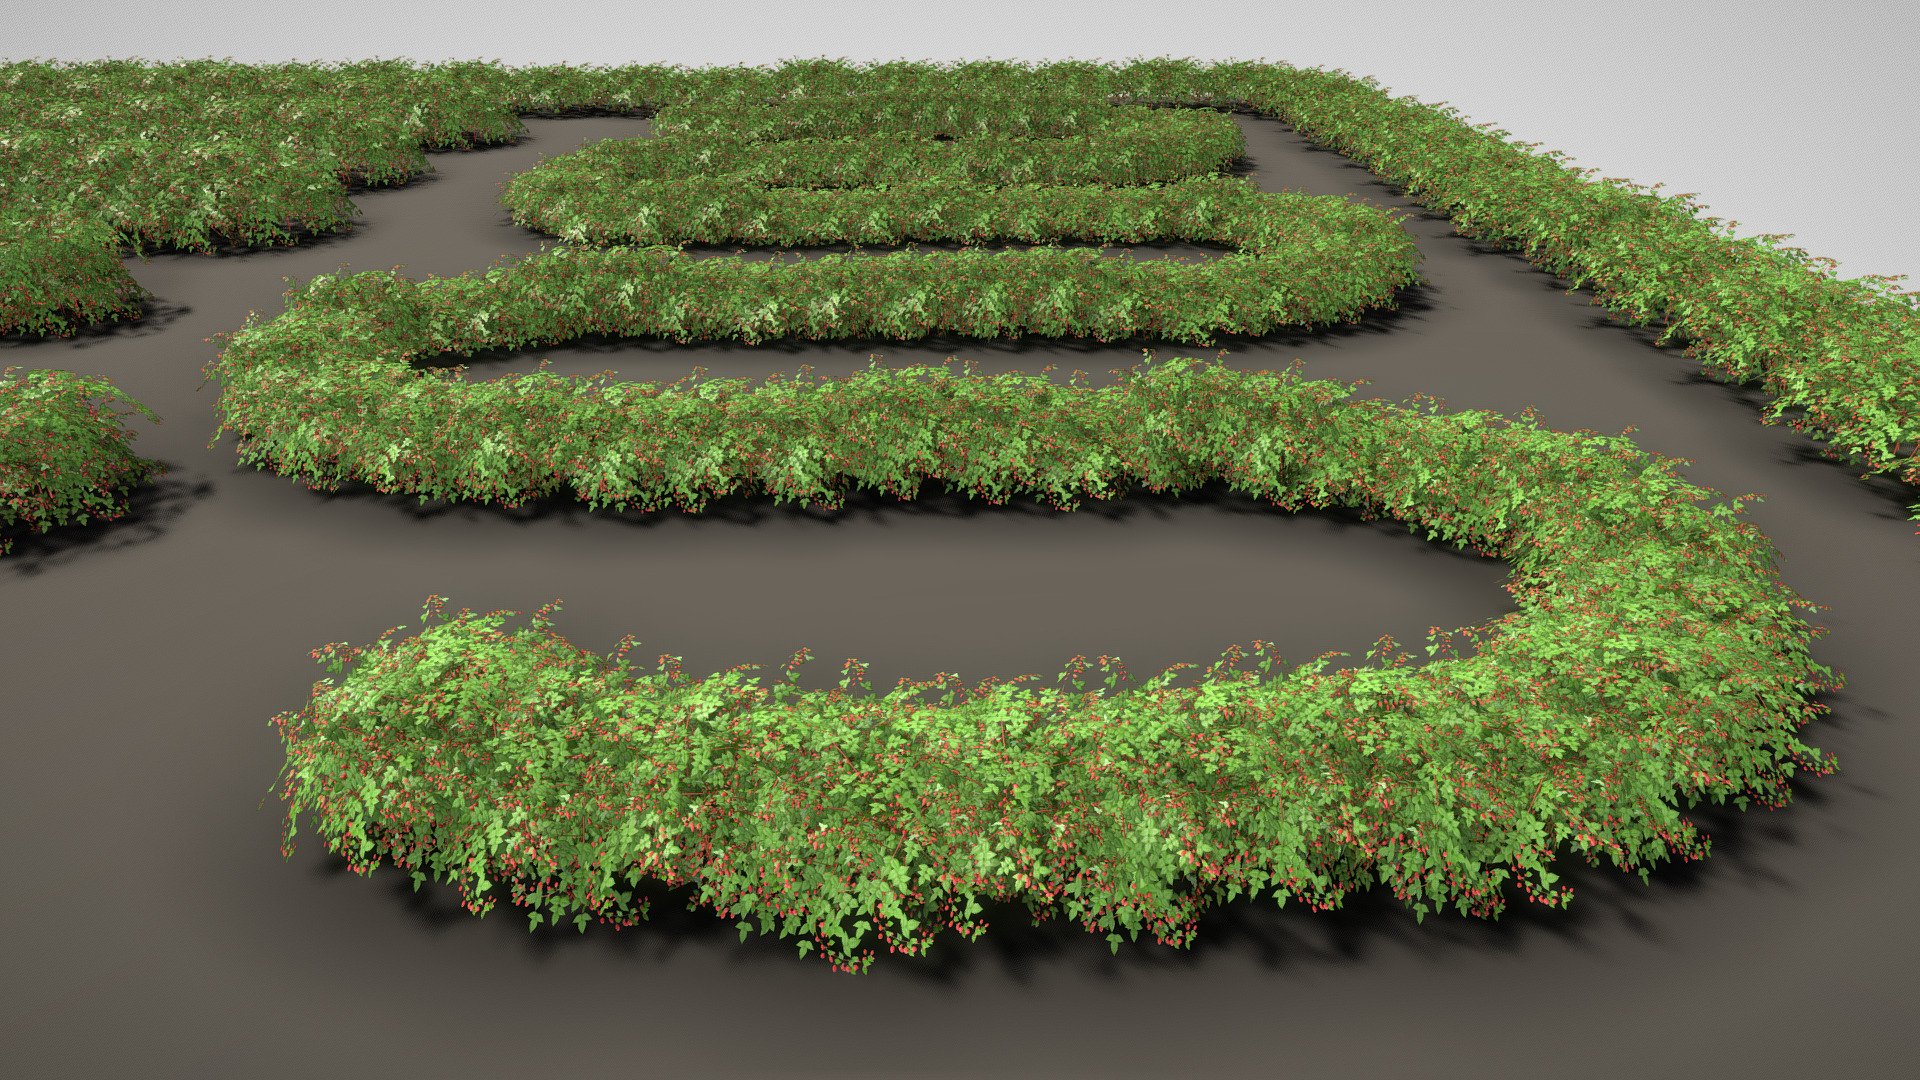 Raspberry Bush / Hedge (Test).

3D modelled and textured by 3DHaupt in Blender 3.5 3d model